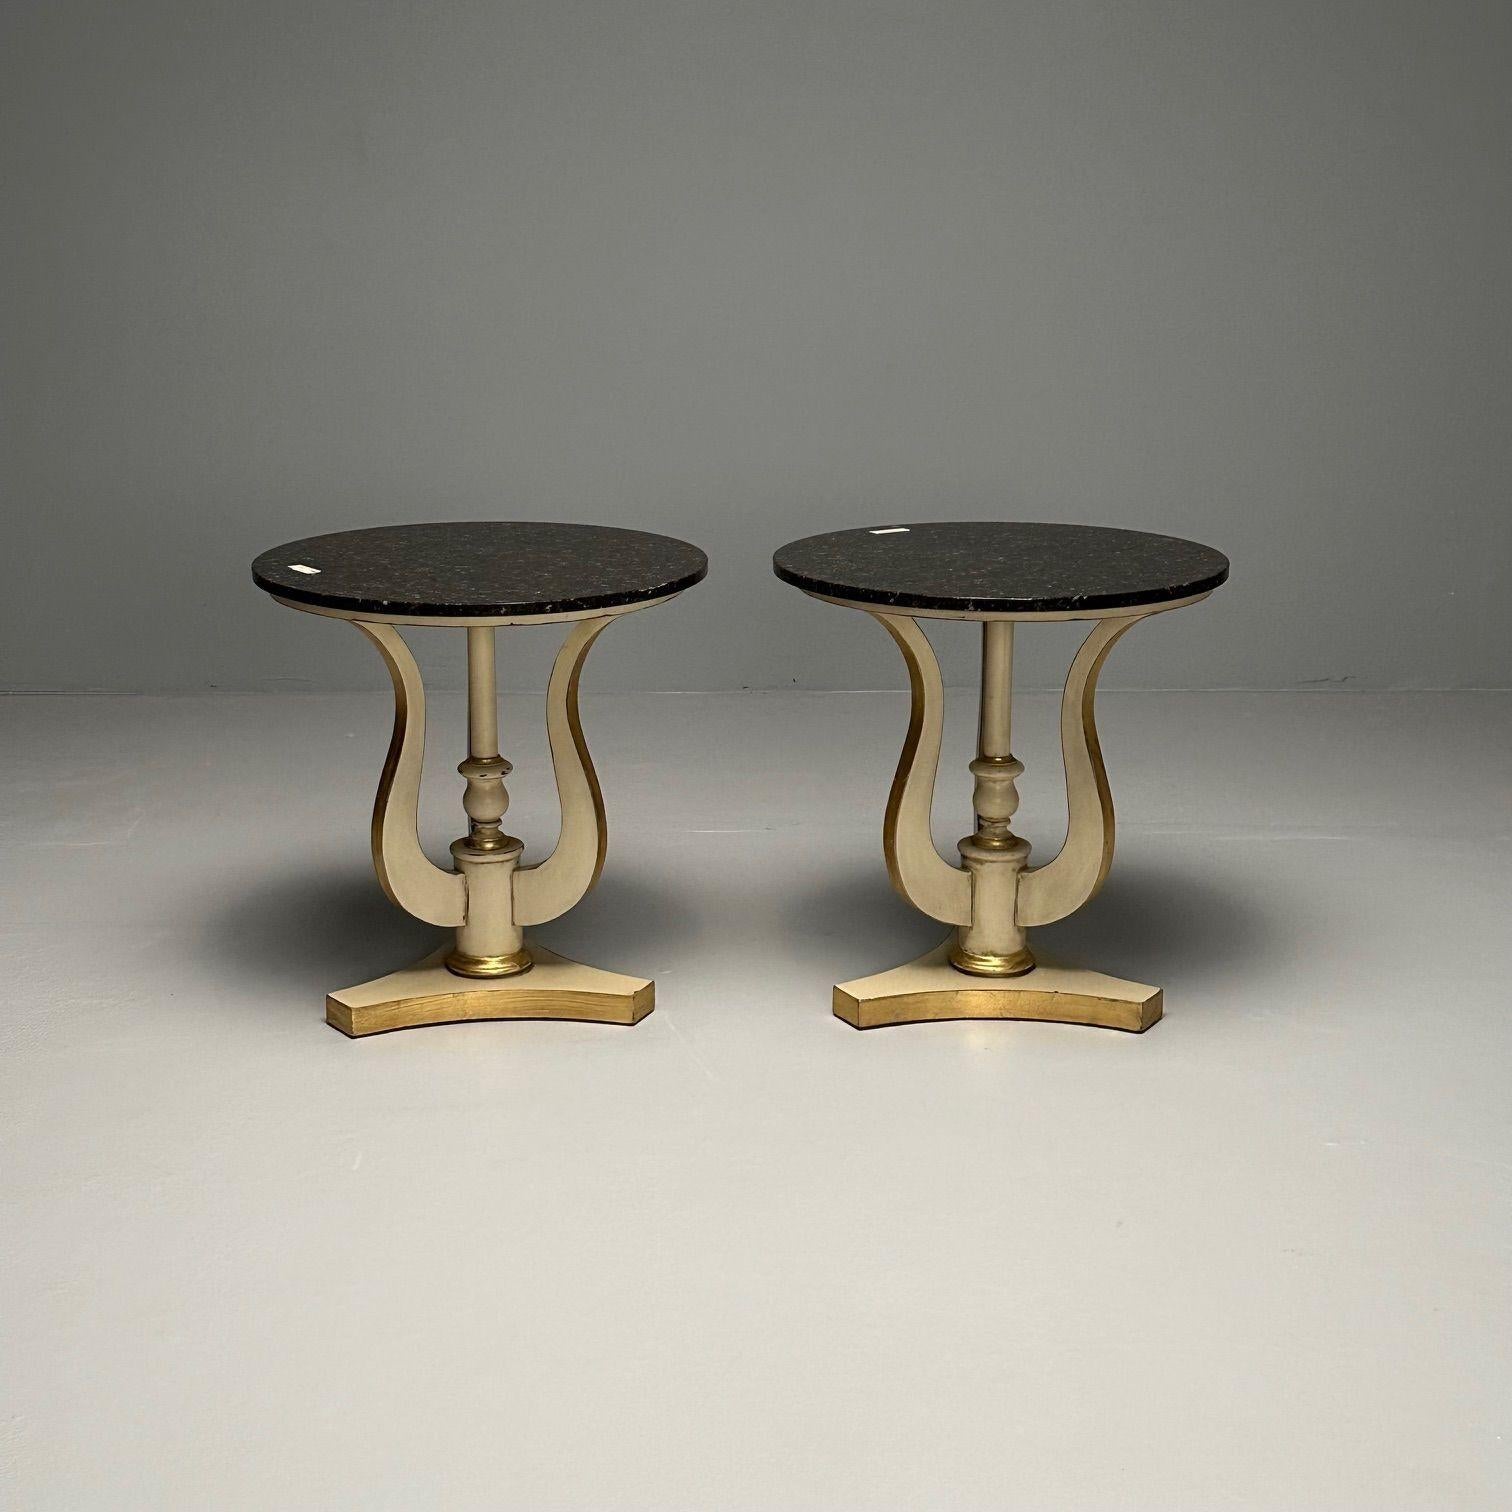 Regency, Side Tables, Pedestals, Ivory Paint, Giltwood, Marble Tops, USA, 1960s In Good Condition For Sale In Stamford, CT